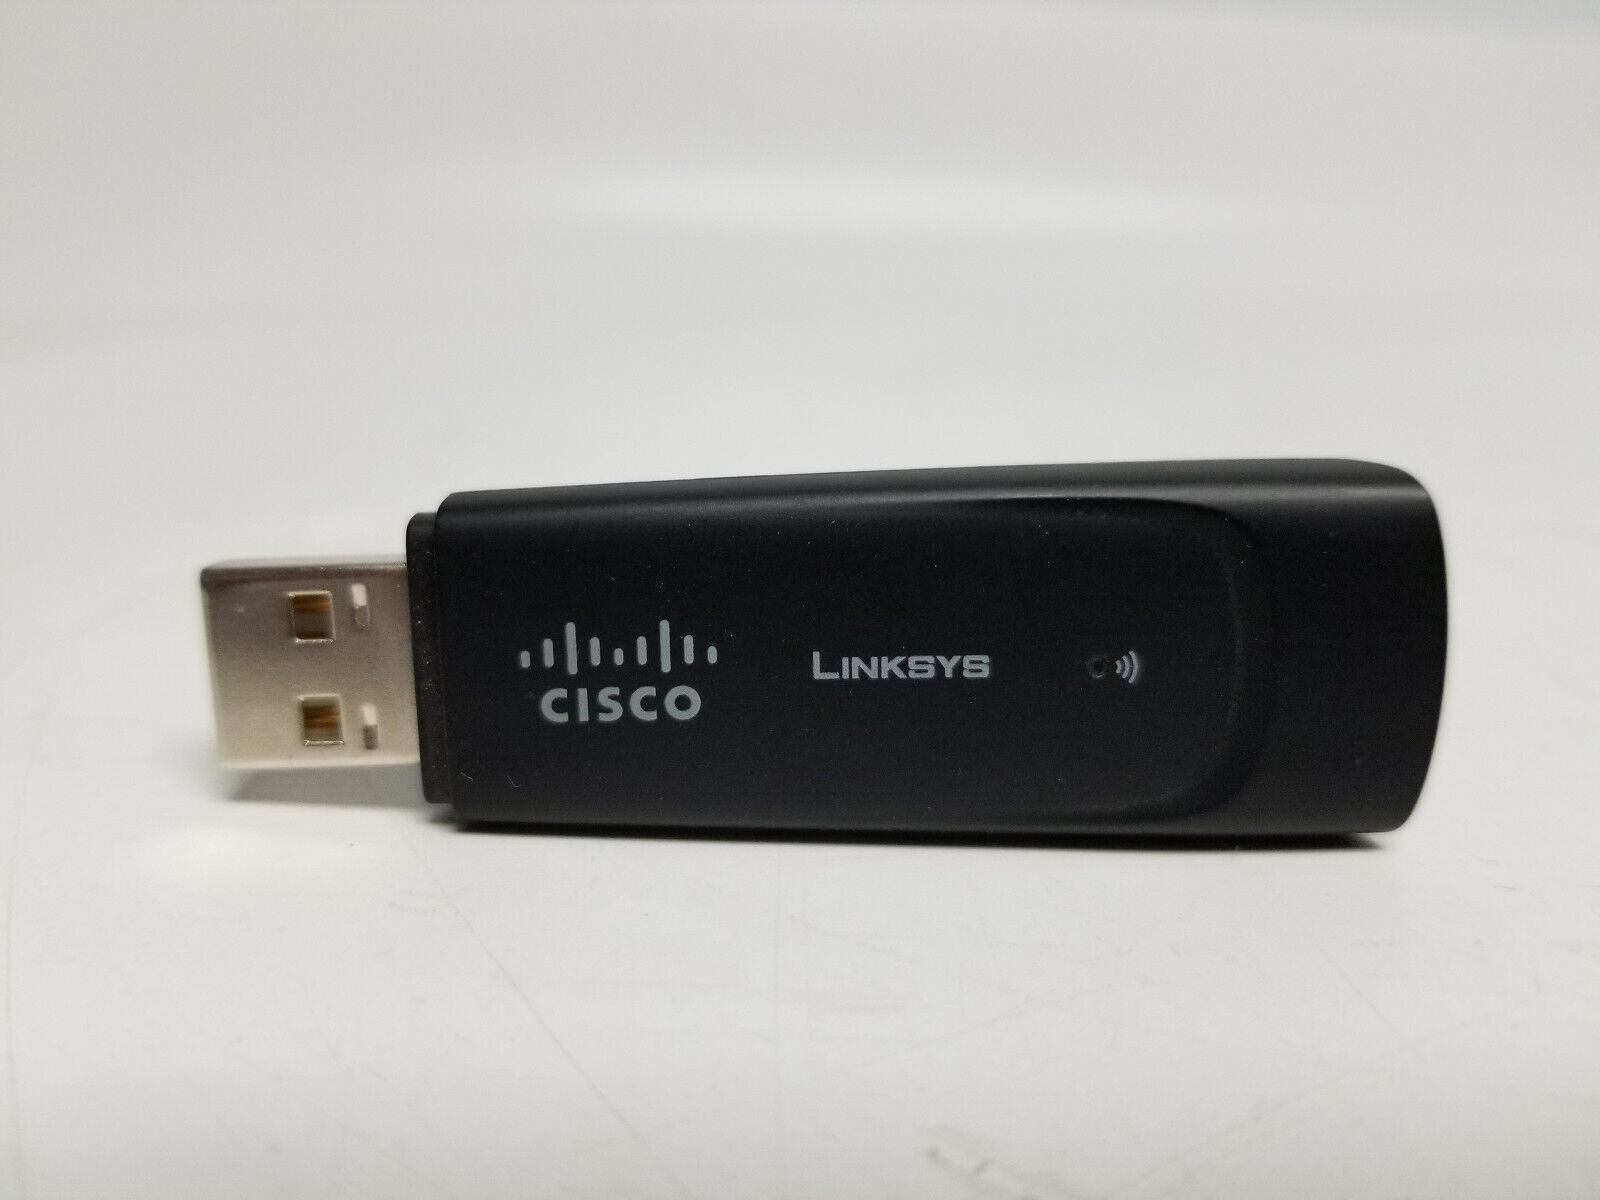 Linksys by Cisco WUSB54GC Compact Wireless-G USB Network Adapter